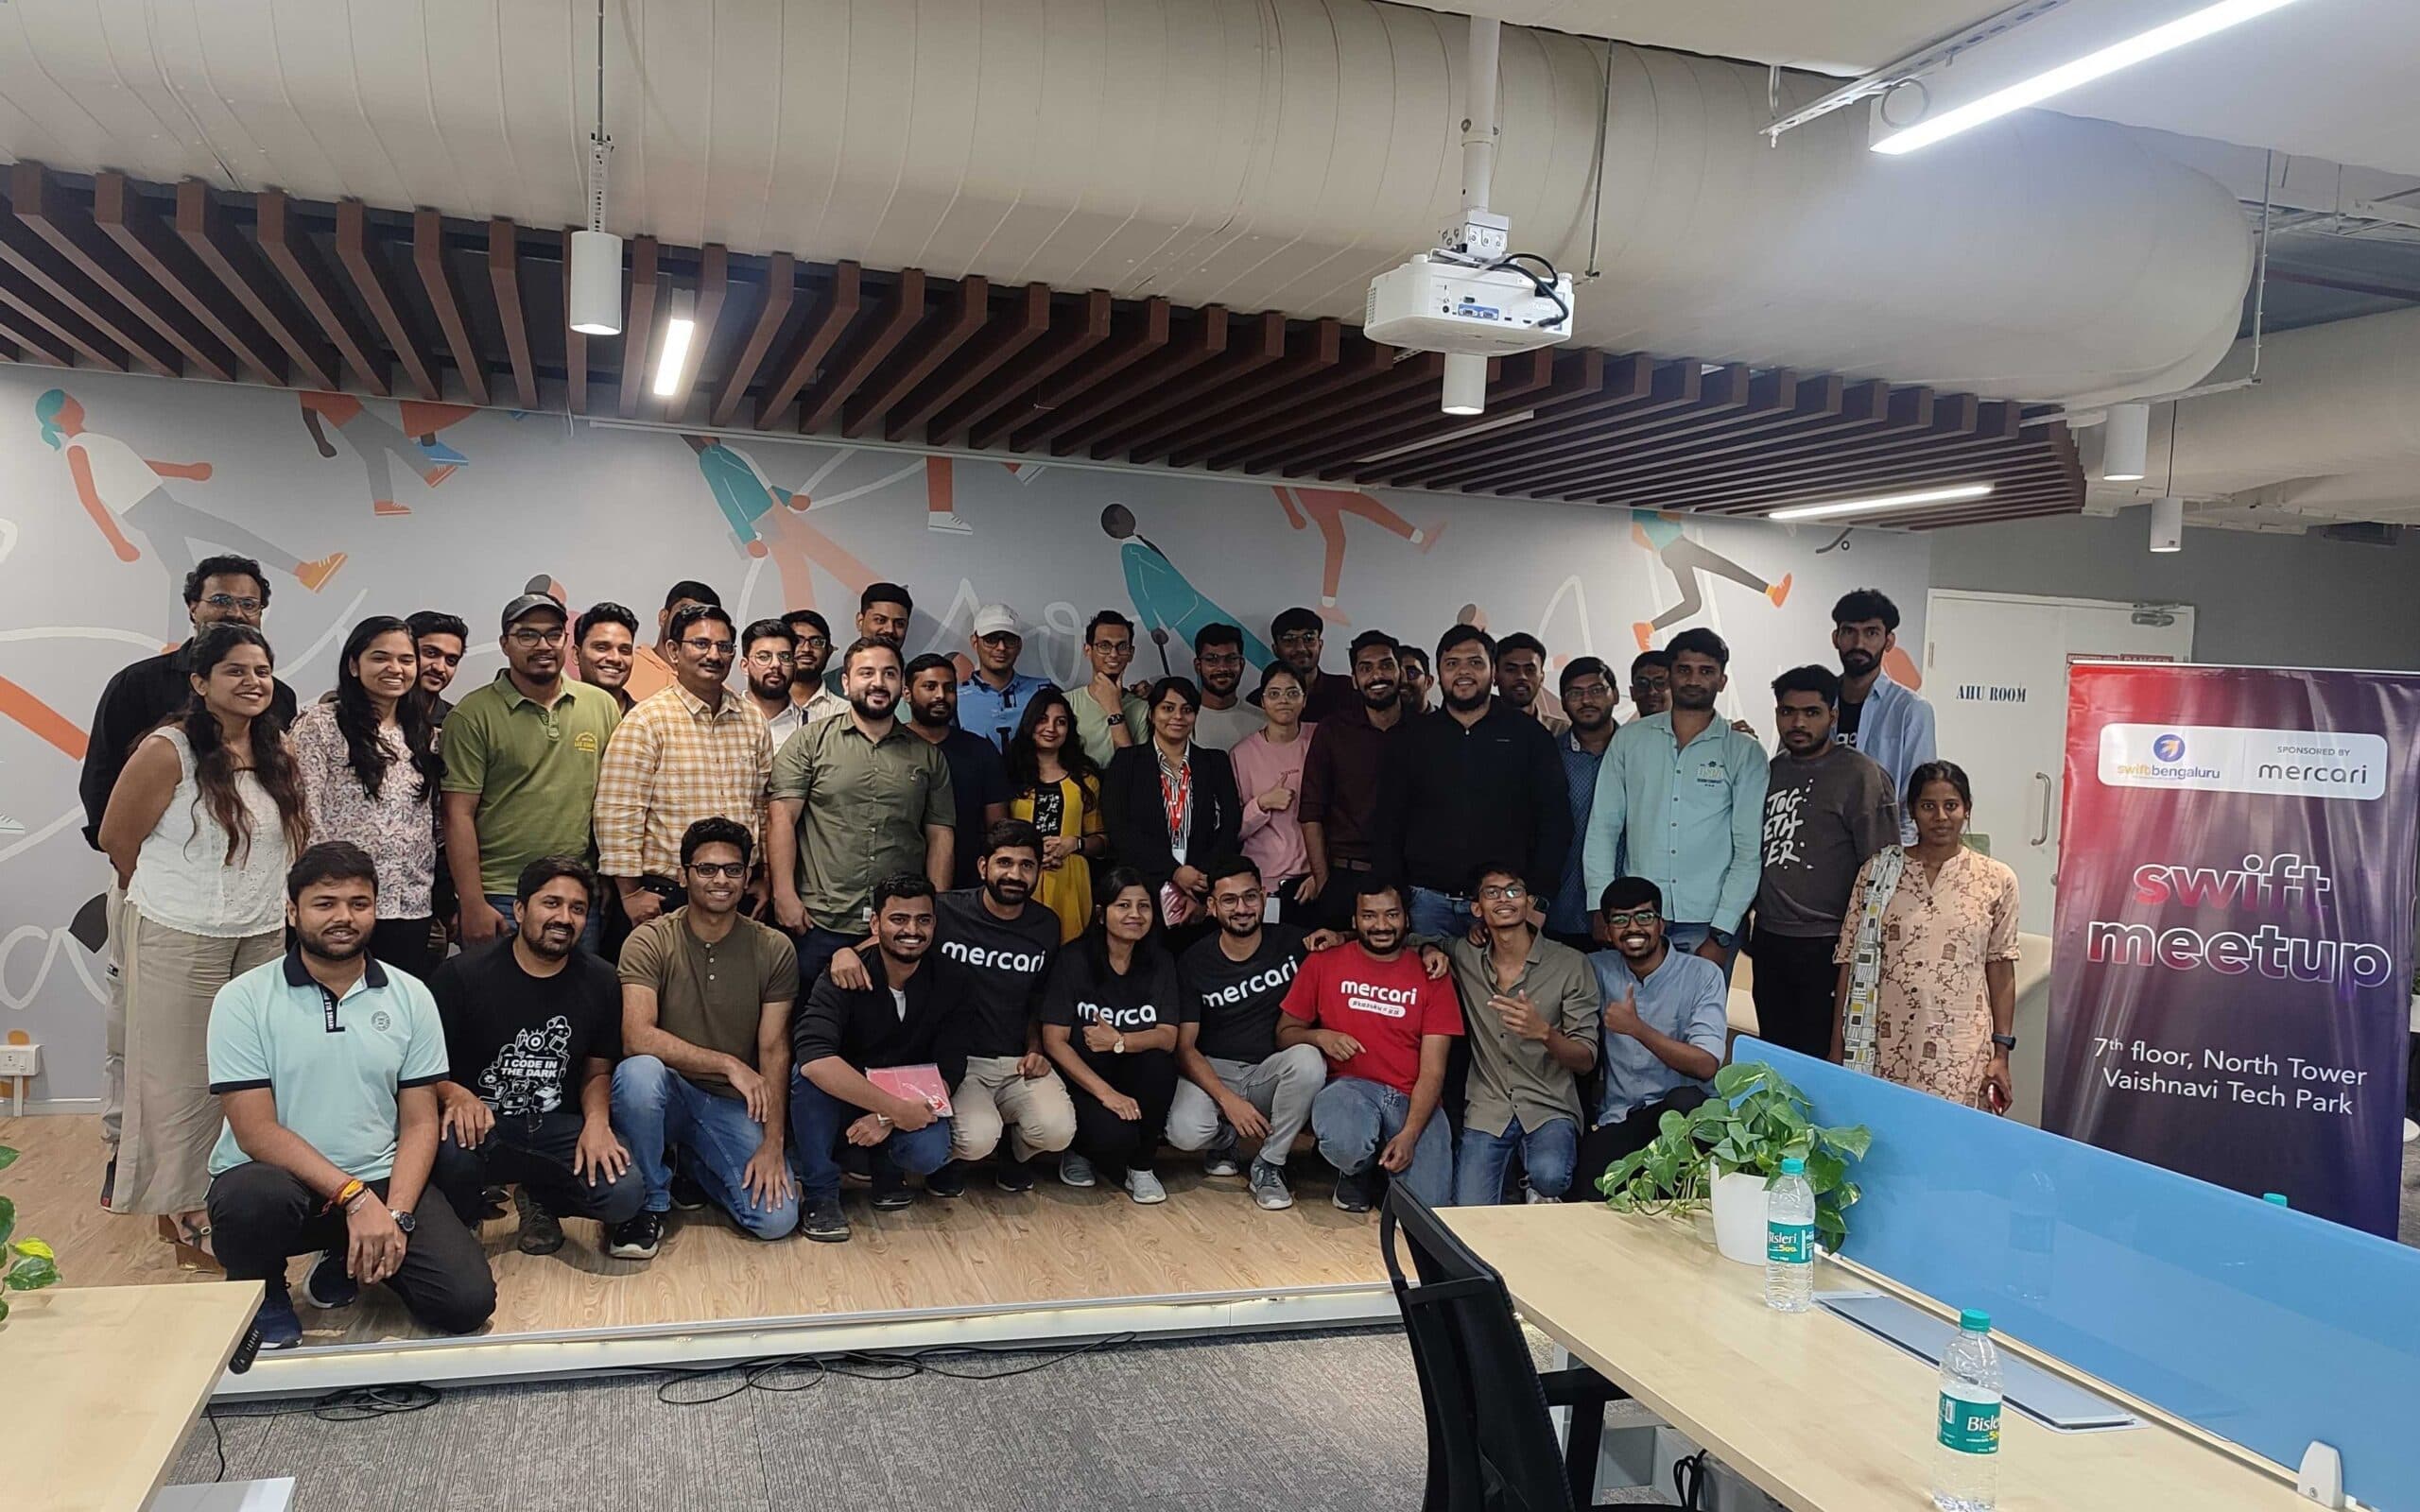 /swift-innovations-unleashed-a-look-inside-the-mercari-india-meetup/